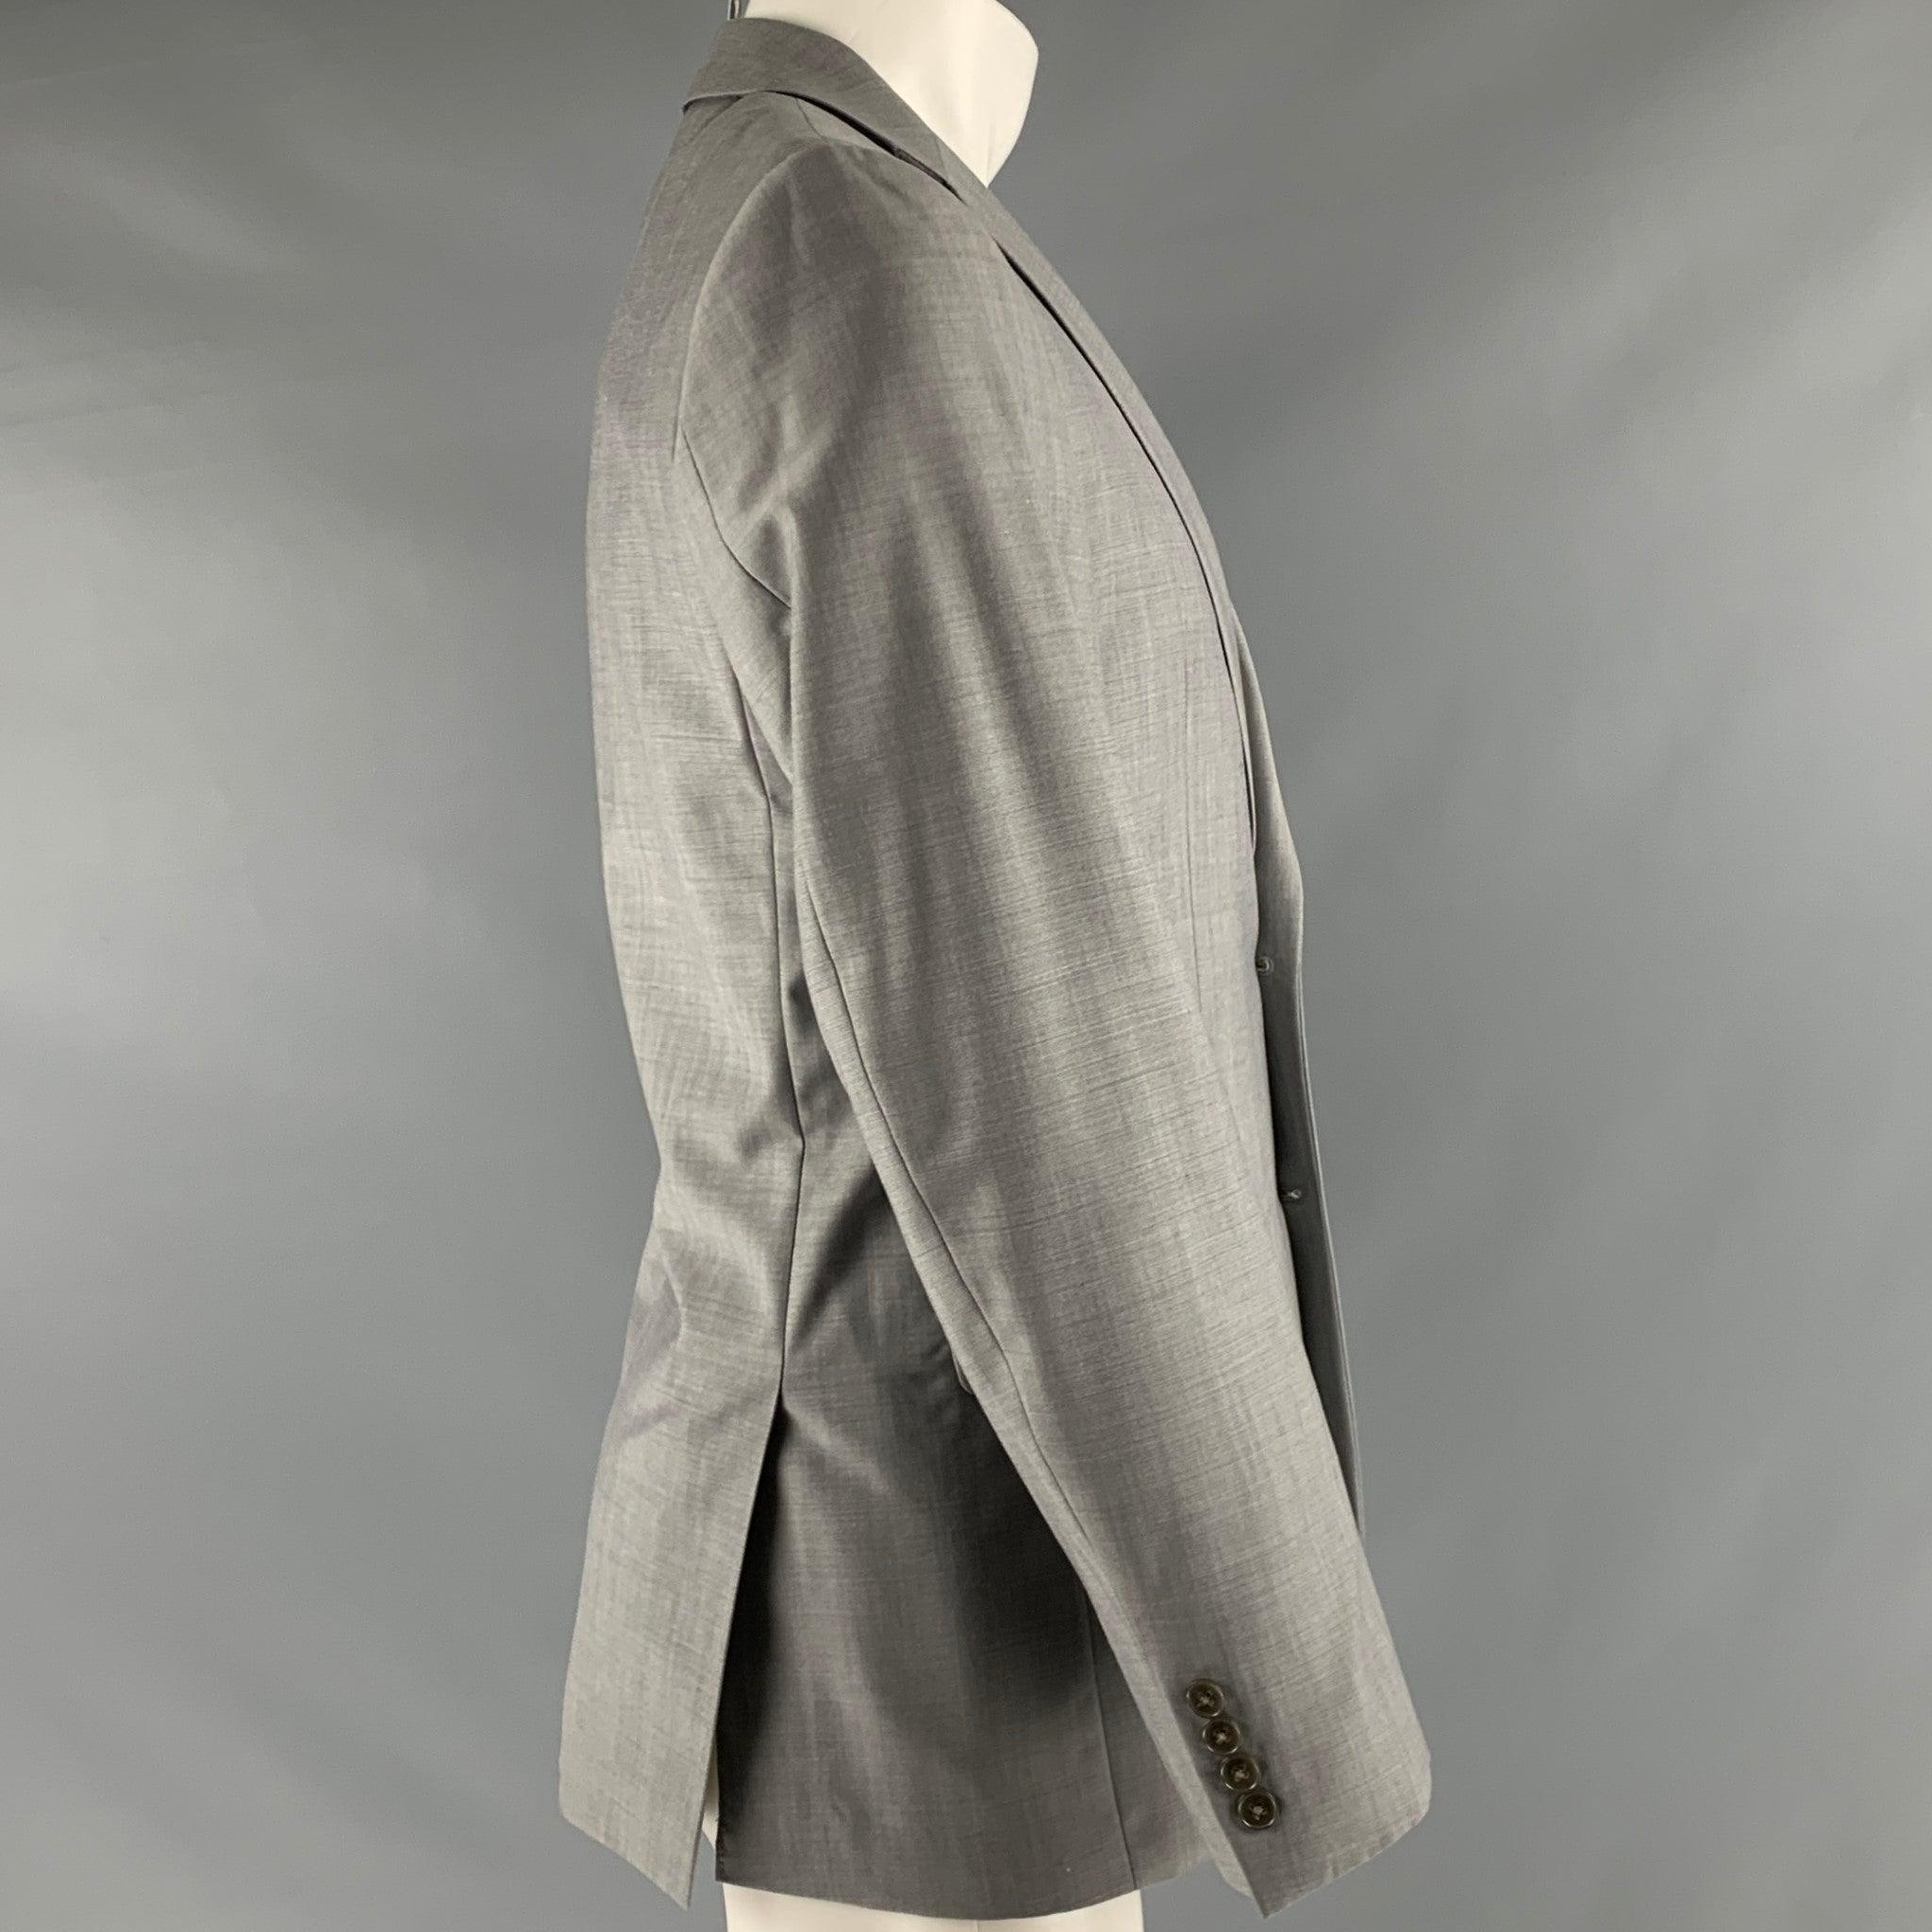 CALVIN KLEIN sport coat in a grey wool with a grey liner and includes a single breasted, two button sport coat with a notch lapel.Very Good Pre-Owned Condition. Minor marks. 

Marked:   48 

Measurements: 
 
Shoulder: 17 inches  Chest: 38 inches 